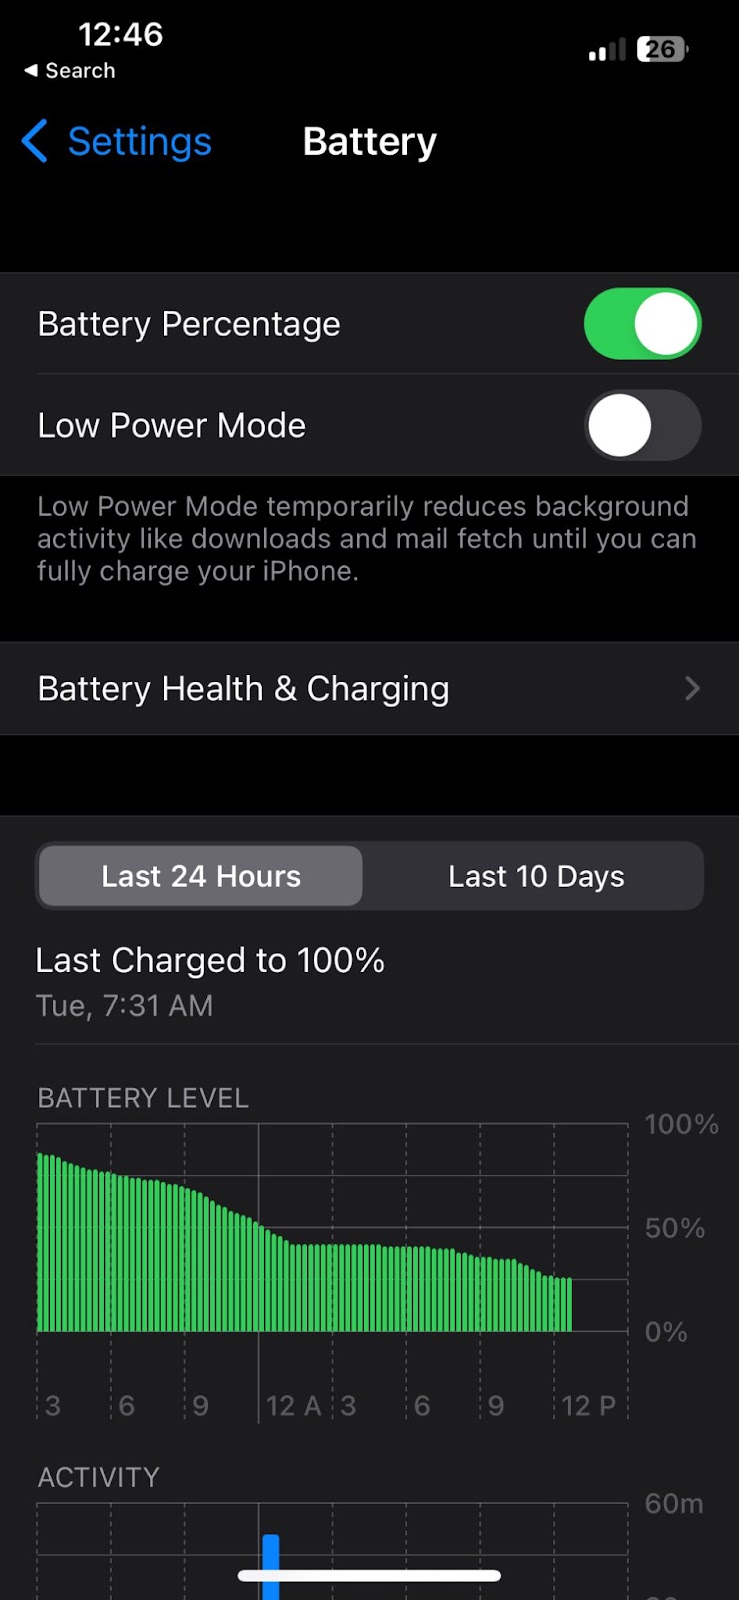 Switch on battery percentage